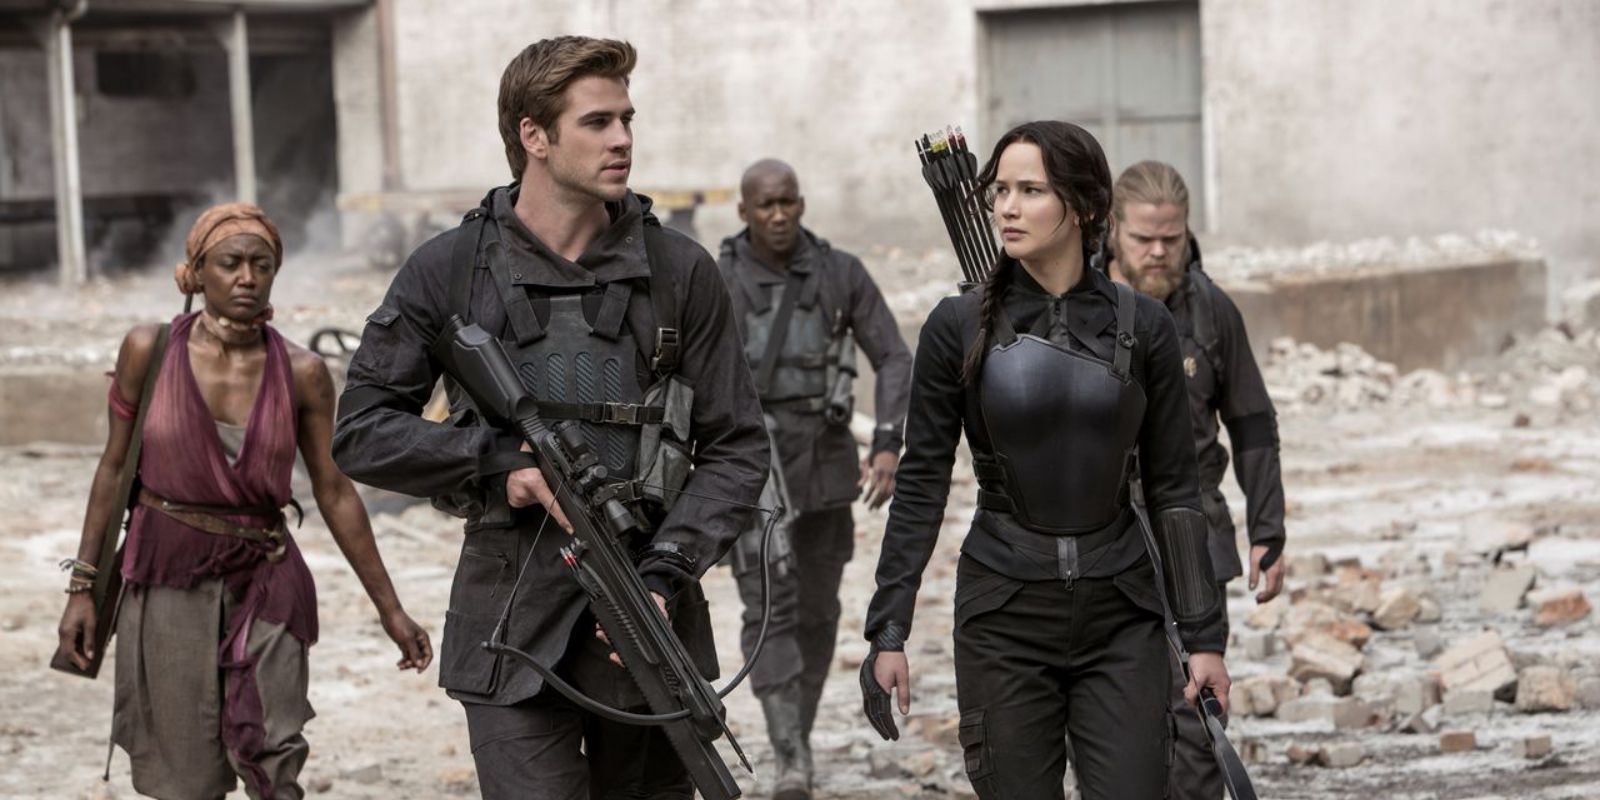 Gale and Katniss walking with rebels in The Hunger Games Mockingjay Part 1.